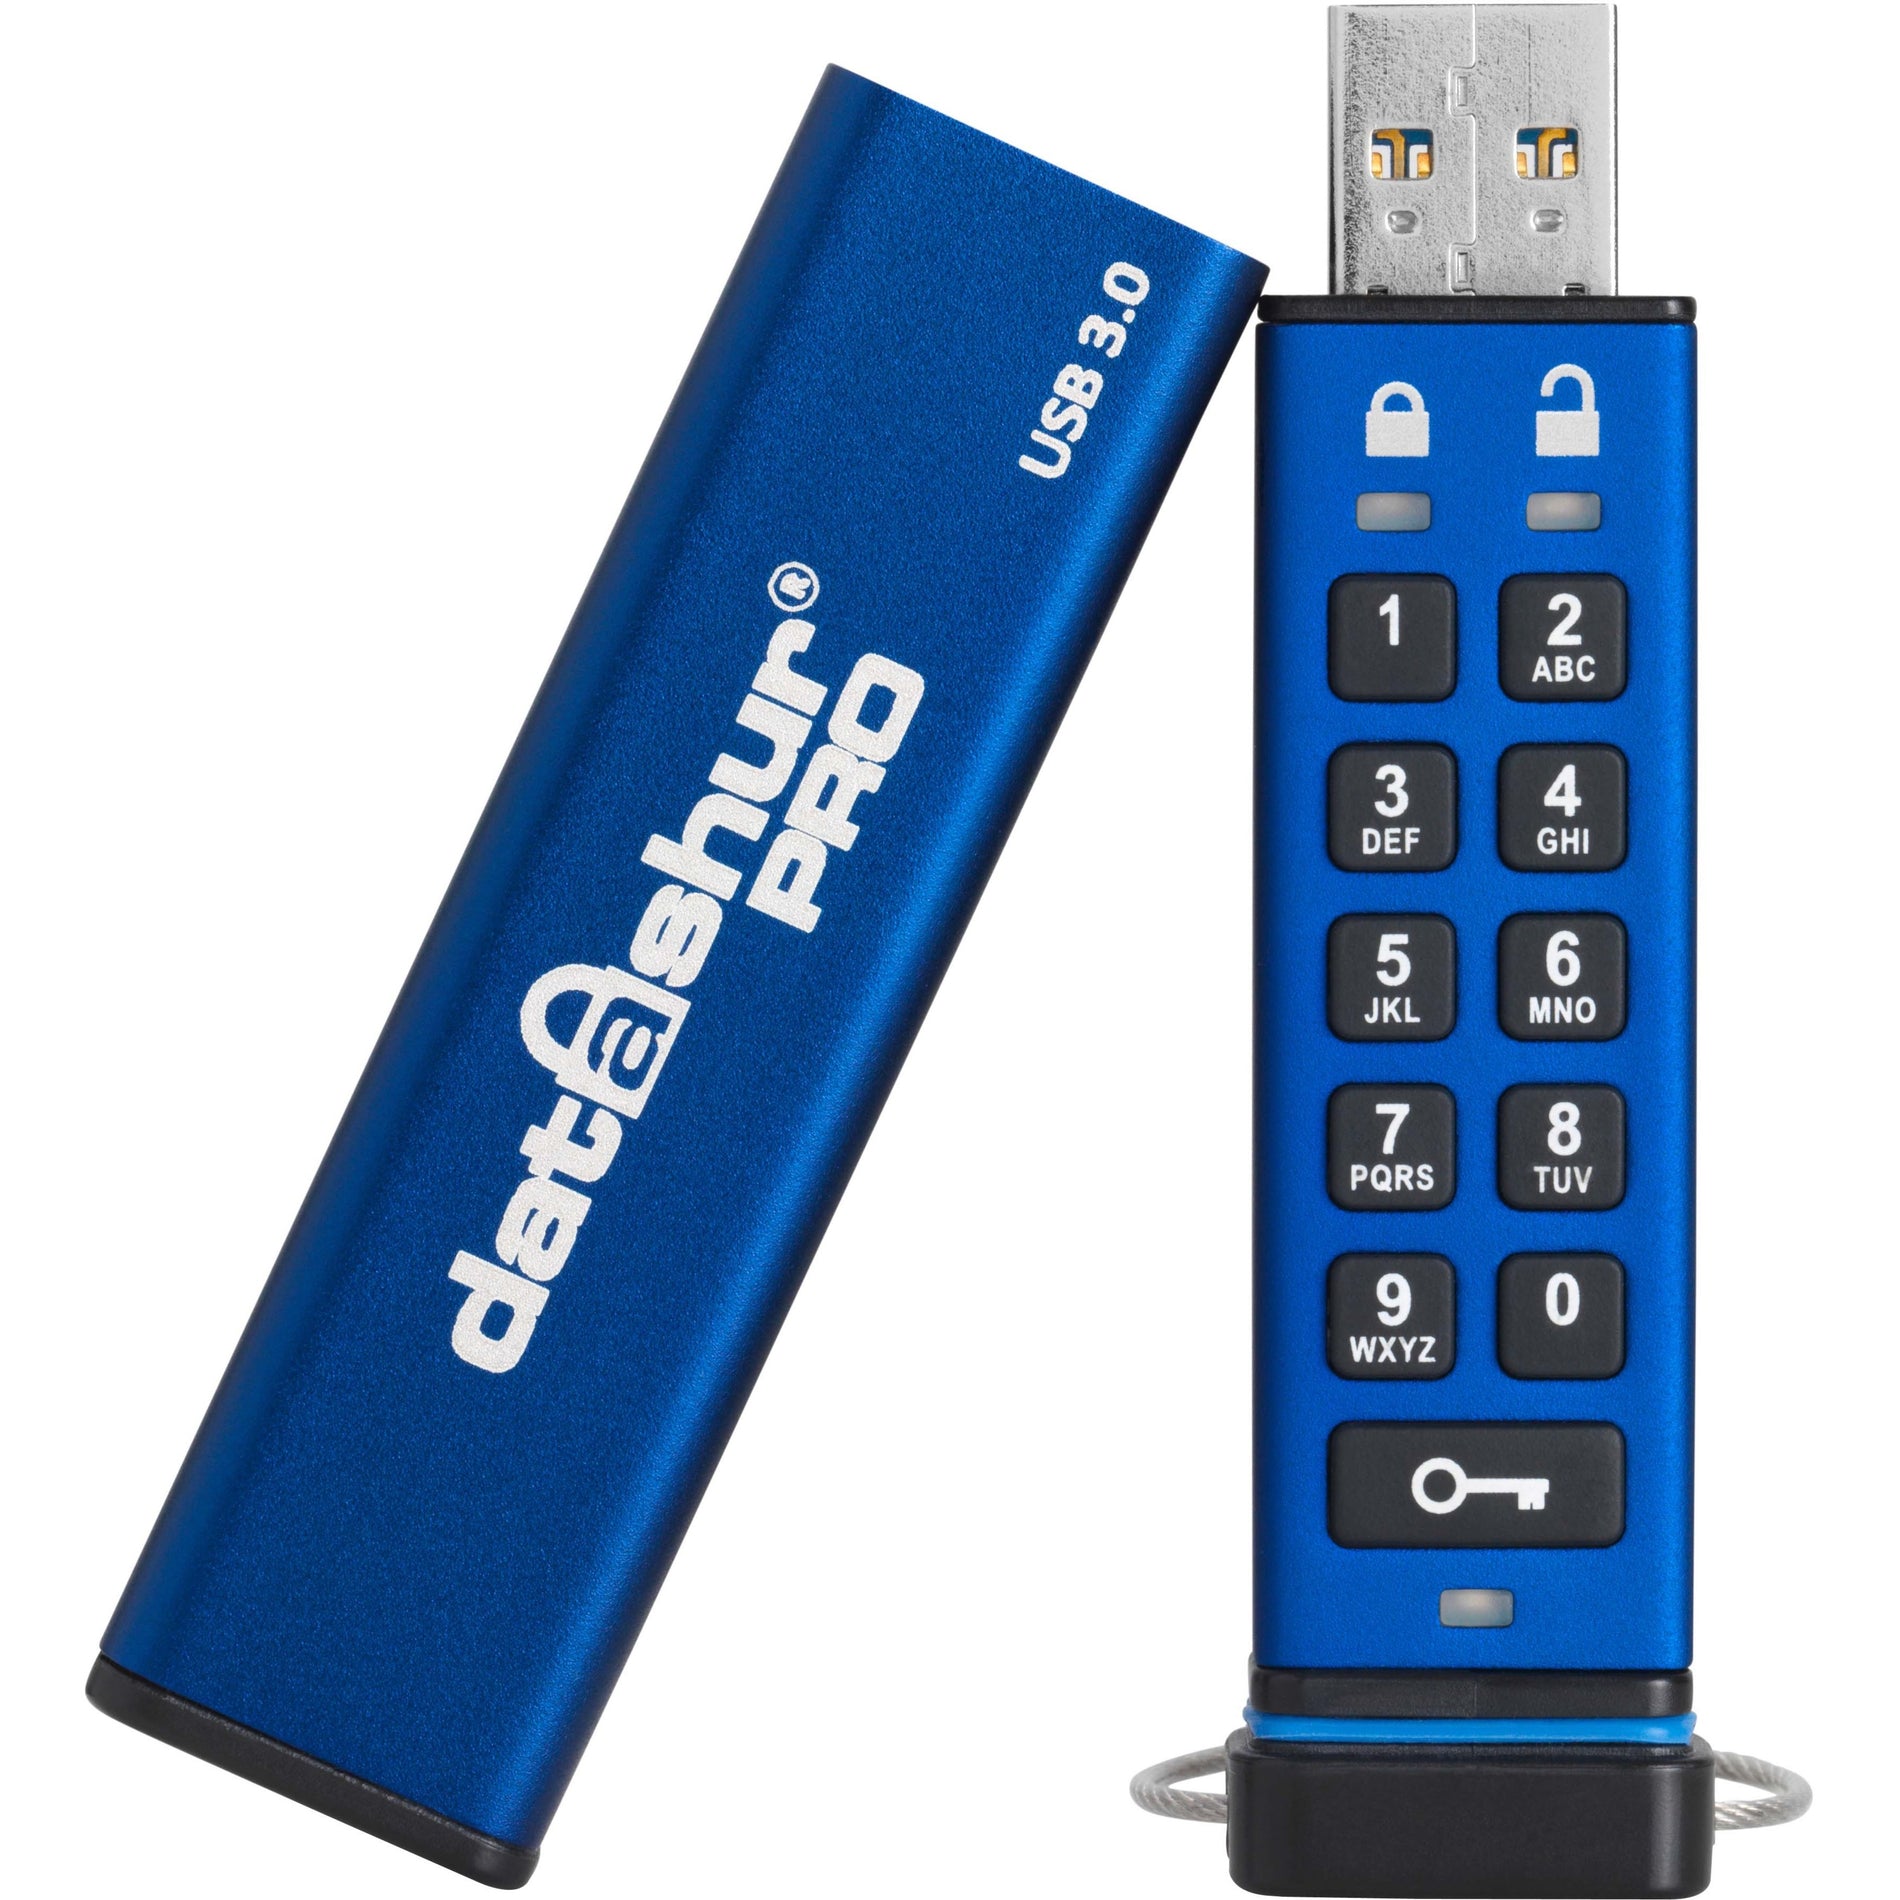 iStorage IS-FL-DA3-256-8 datAshur PRO 8GB USB 3.2 (Gen 1) Type A Flash Drive, Secure, FIPS 140-2 Level 3 Certified, Password Protected, Dust/Water Resistant